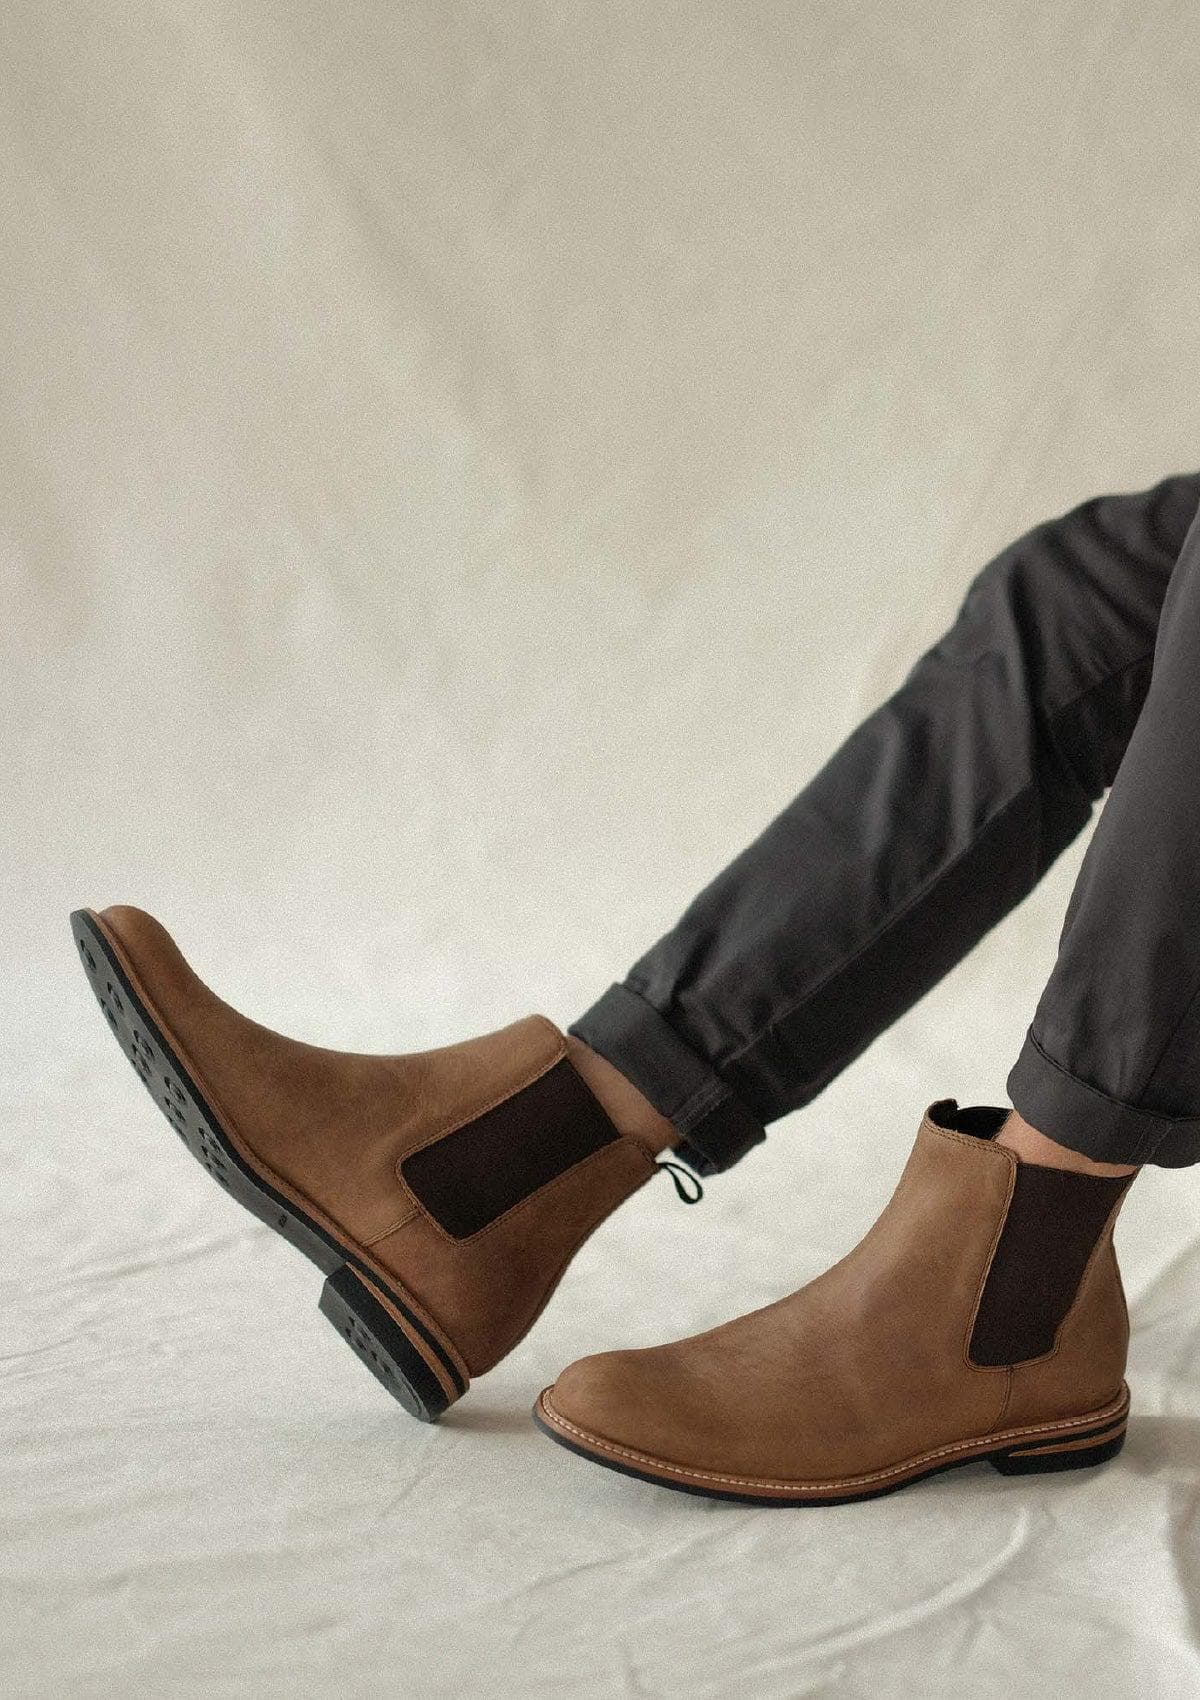 All-Weather Chelsea Boot - Tobacco